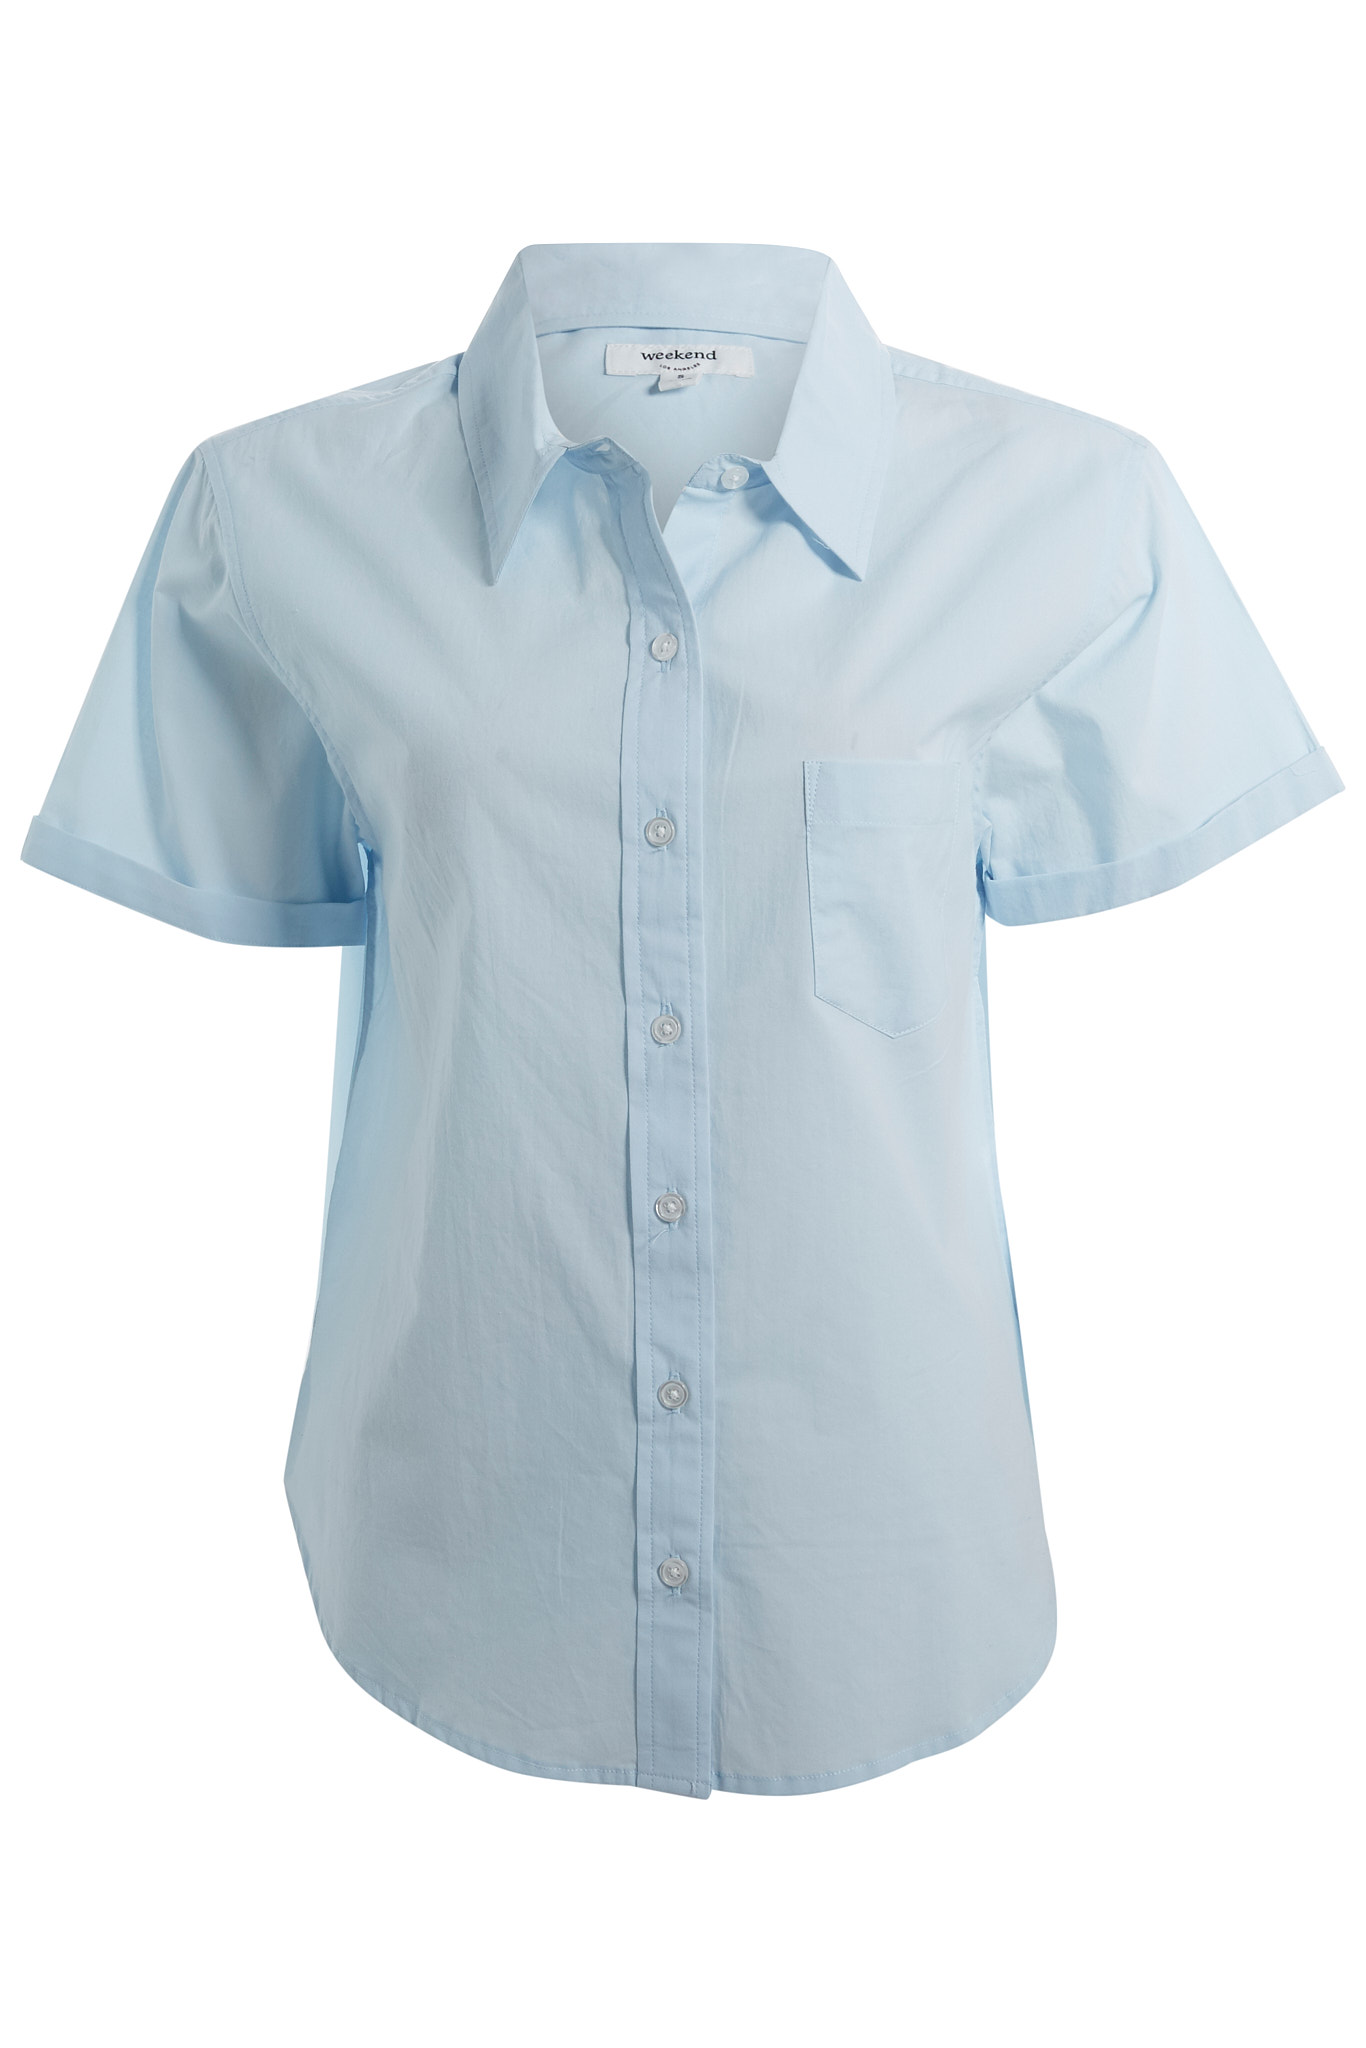 My Everyday Best Blue Ribbed Short Sleeve Button-Front Top